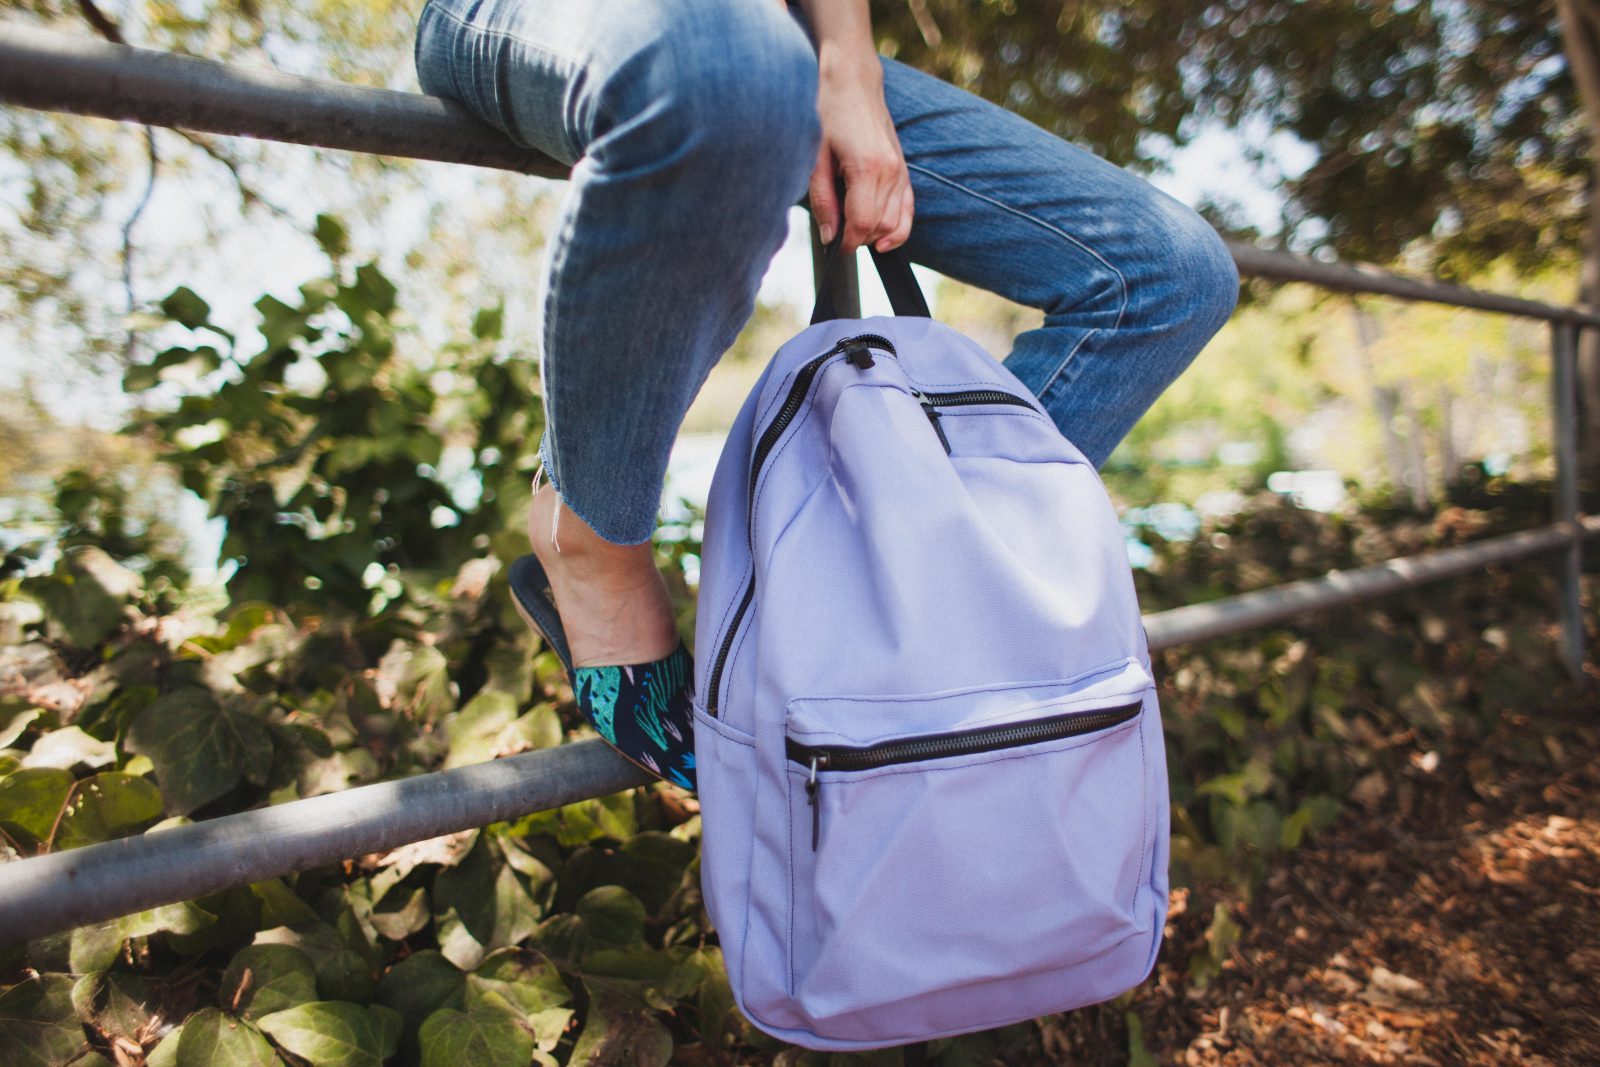 5 Thoughtful Tips for Back to School Success - Society6 Blog